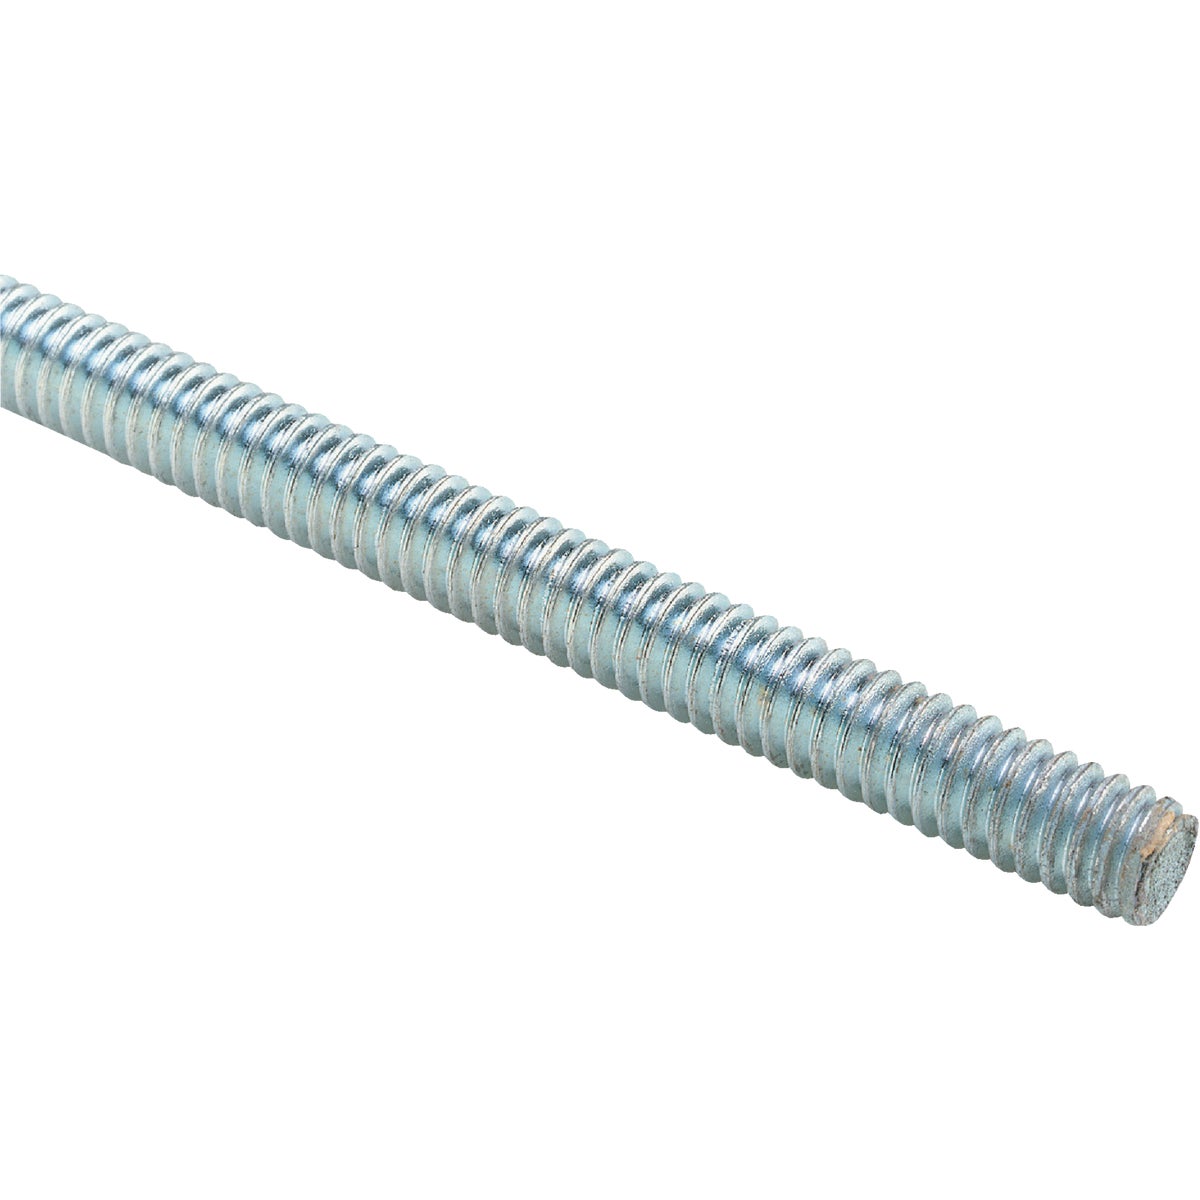 Superstrut 3/8 In.-16 x 10 Ft. Continuous Thread Threaded Rod